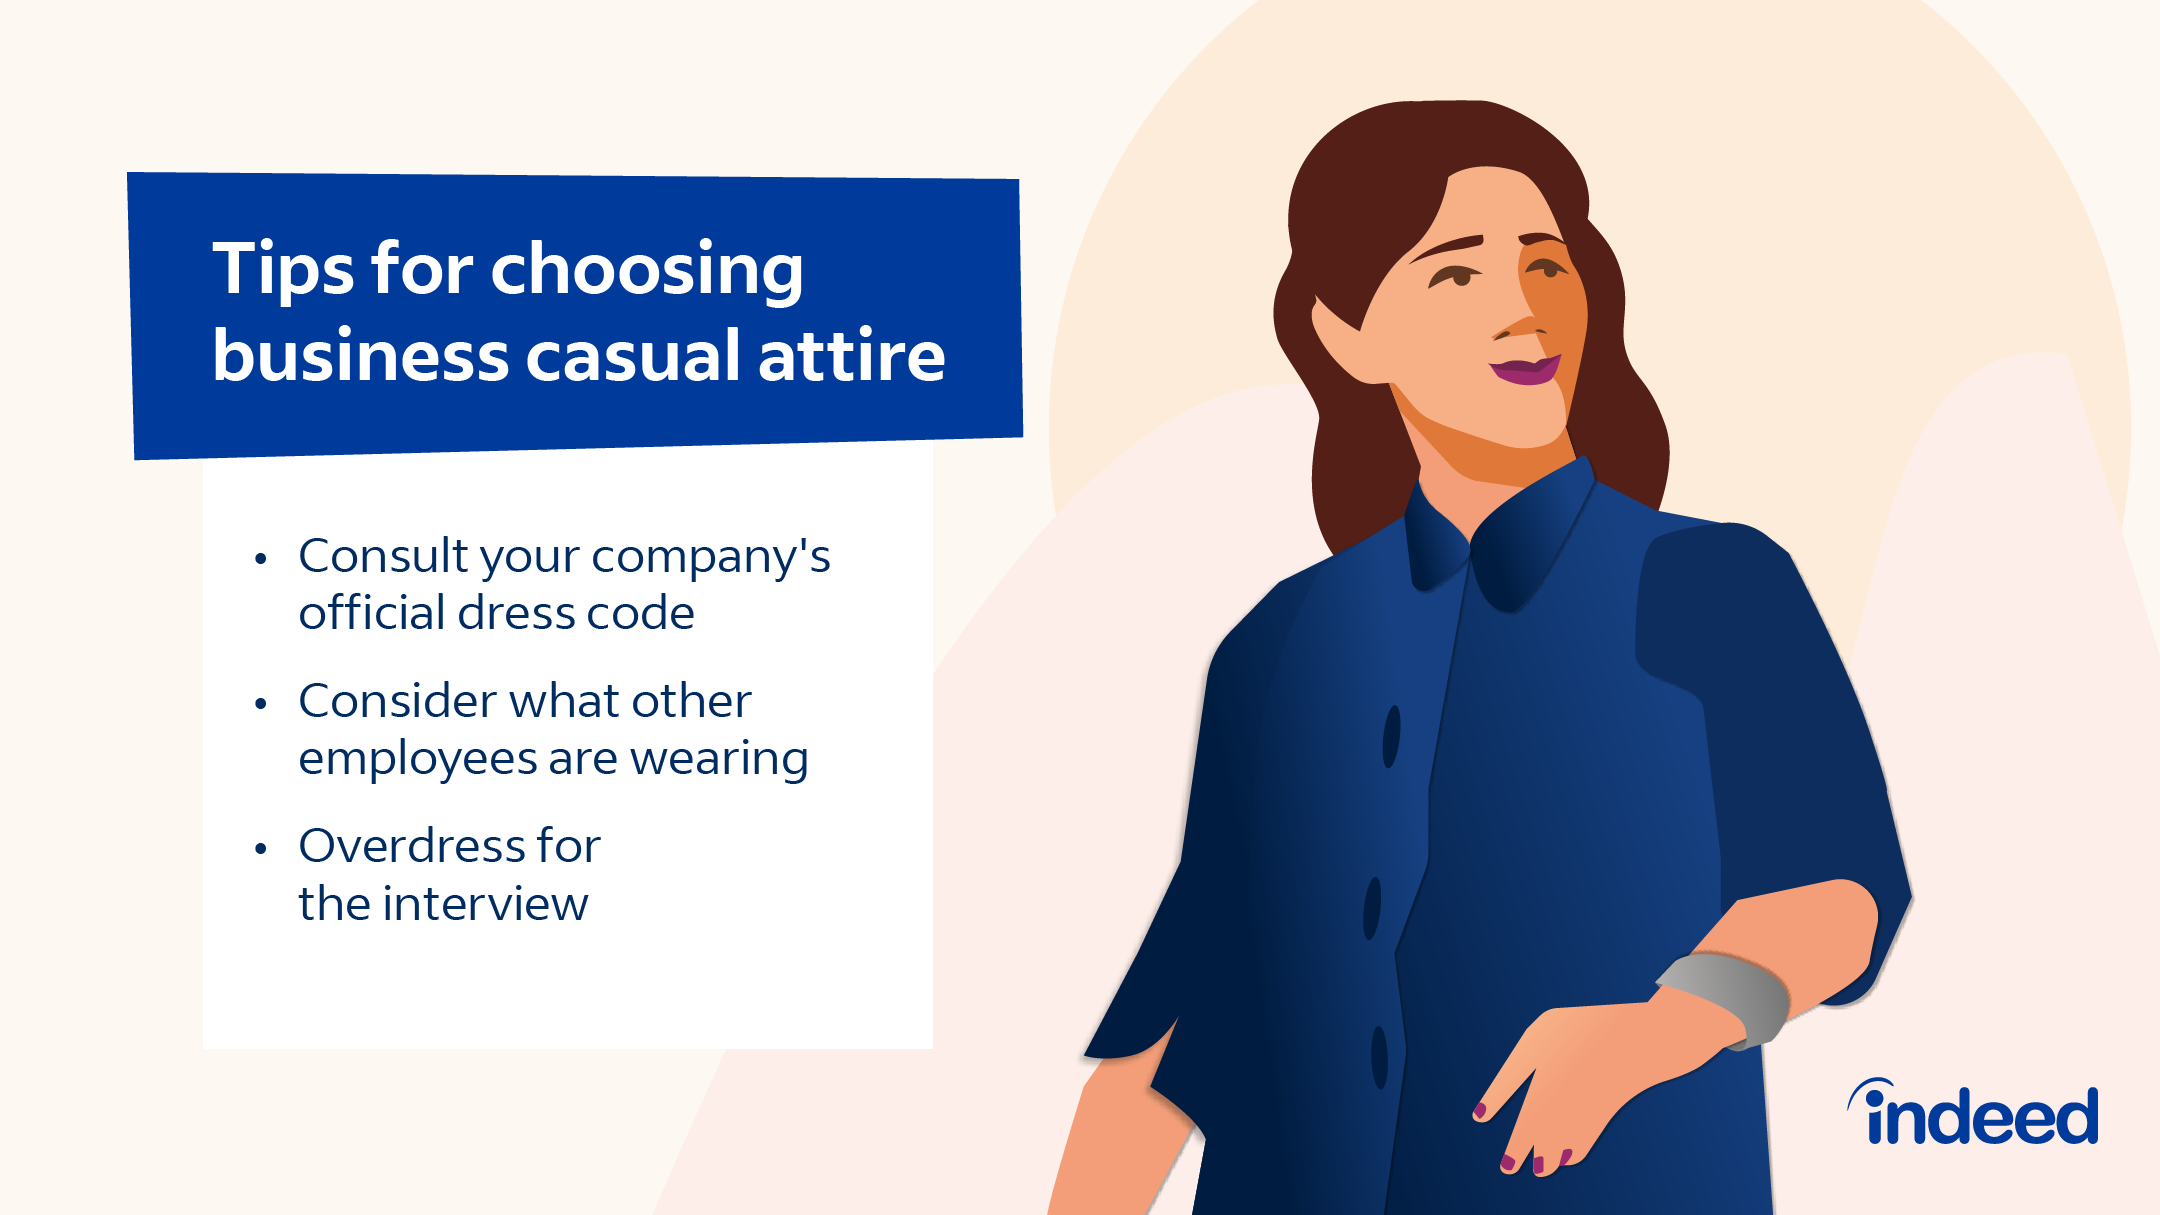 Women's Business Casual - Business Casual Attire